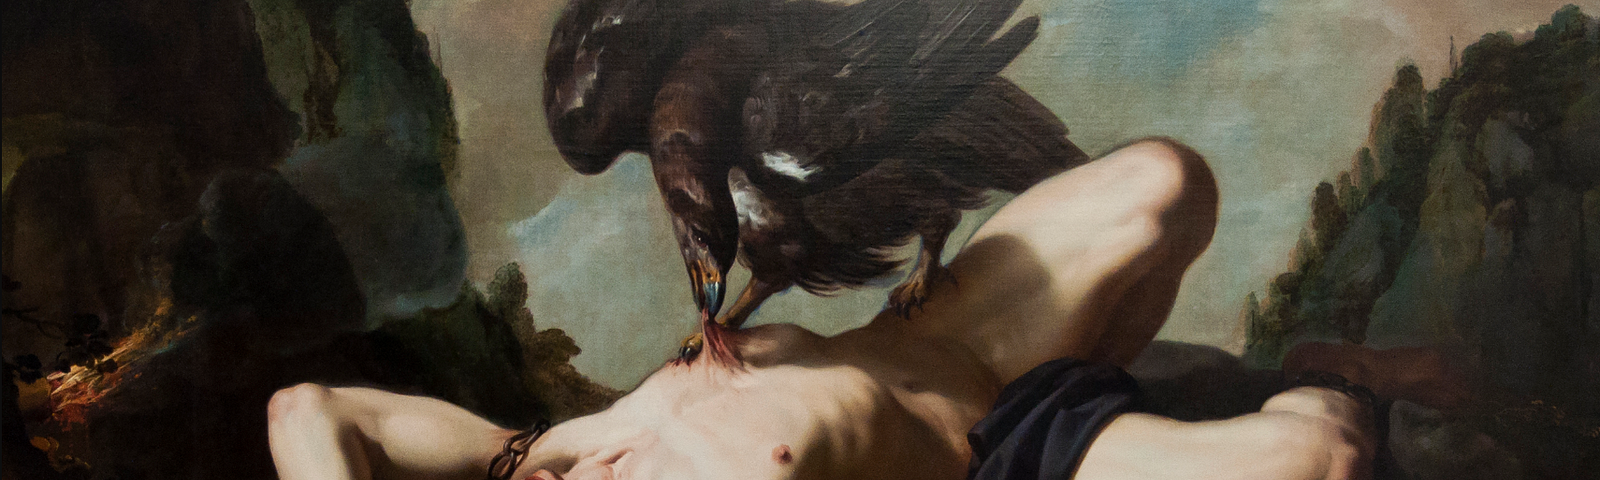 A light-skinned man lies naked, prone on a rock. His arms are bound with chains, and his mouth is open in a yell. A large, black bird stands on top of him, biting at his abdomen with its beak.